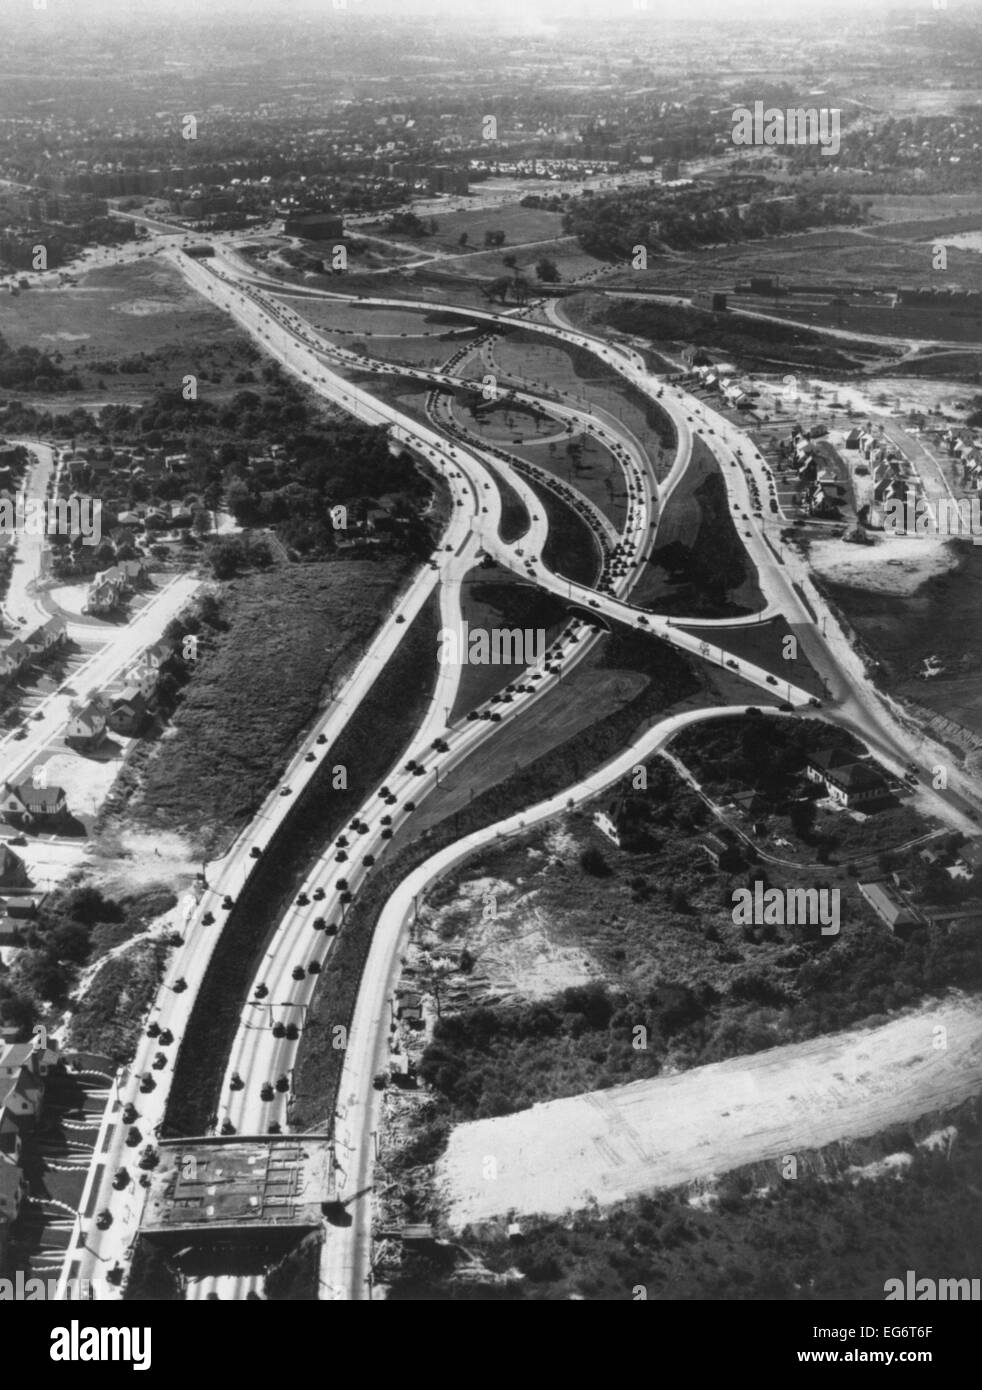 Aerial view of limited access highway on Long Island. The new roads provide access from the growing suburbs to New York City. Stock Photo